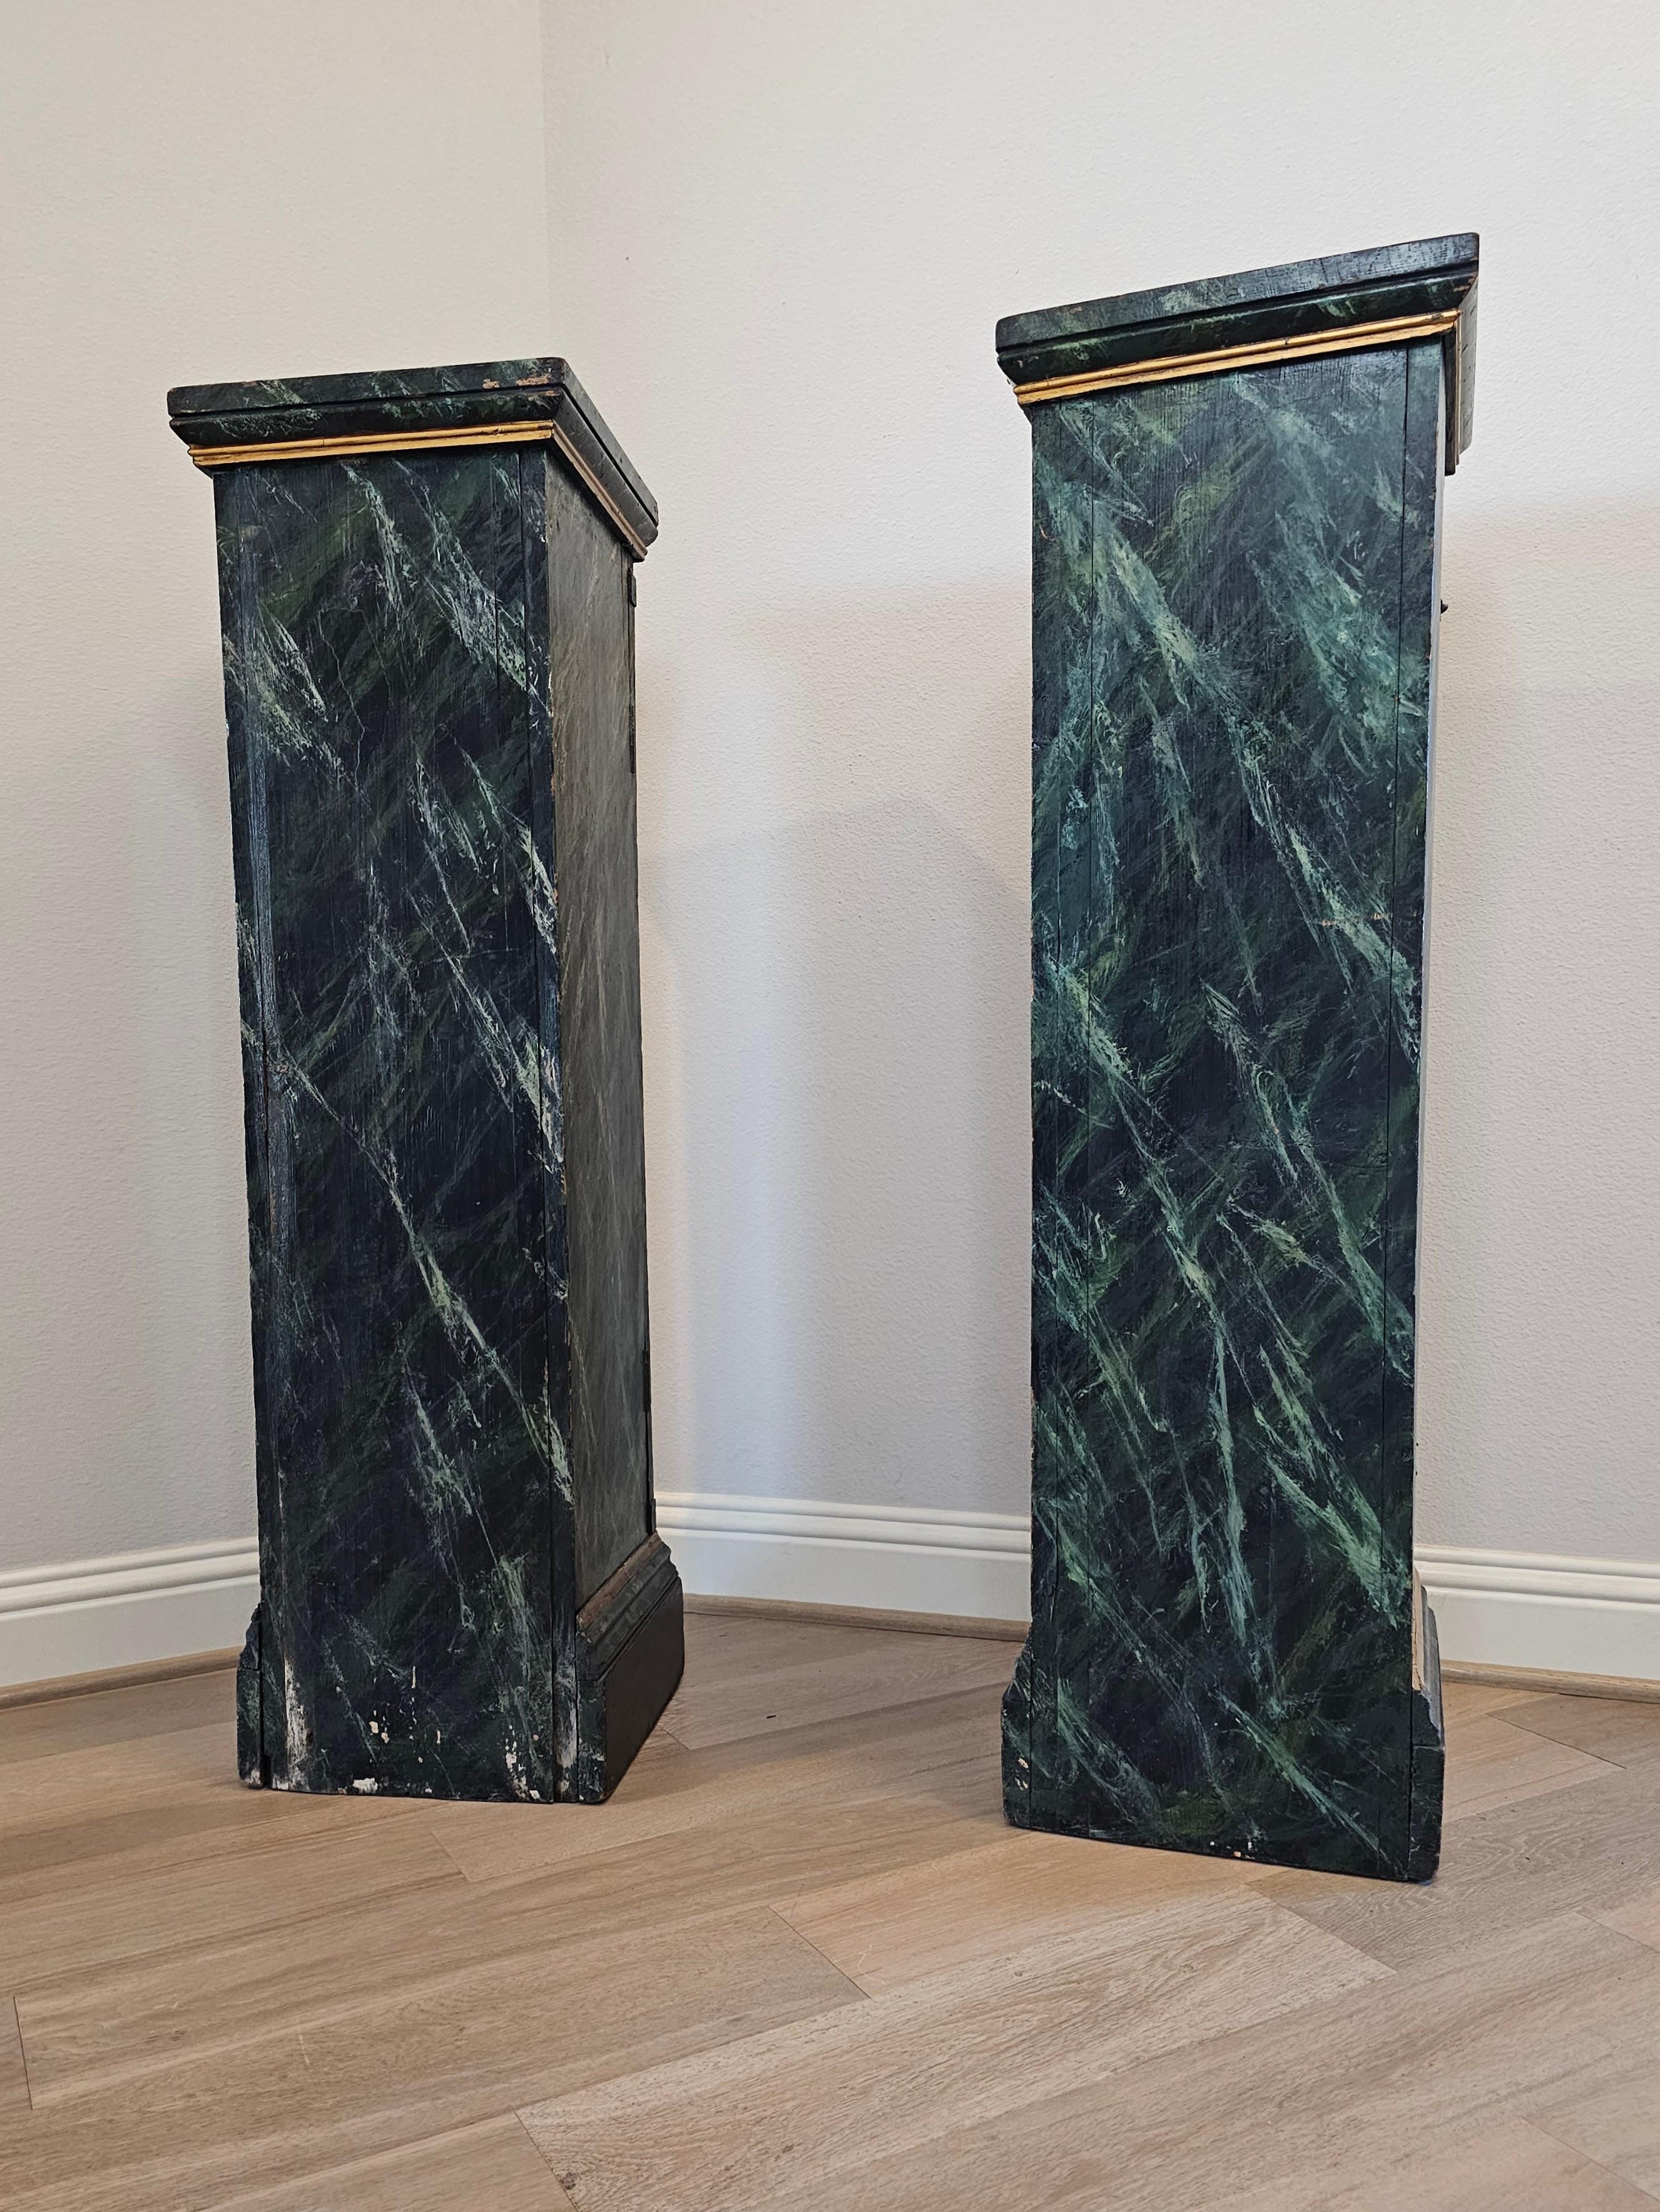 Antique Italian Neo-classical Marbleized Wood Pedestal Cabinet Stand Pair For Sale 7